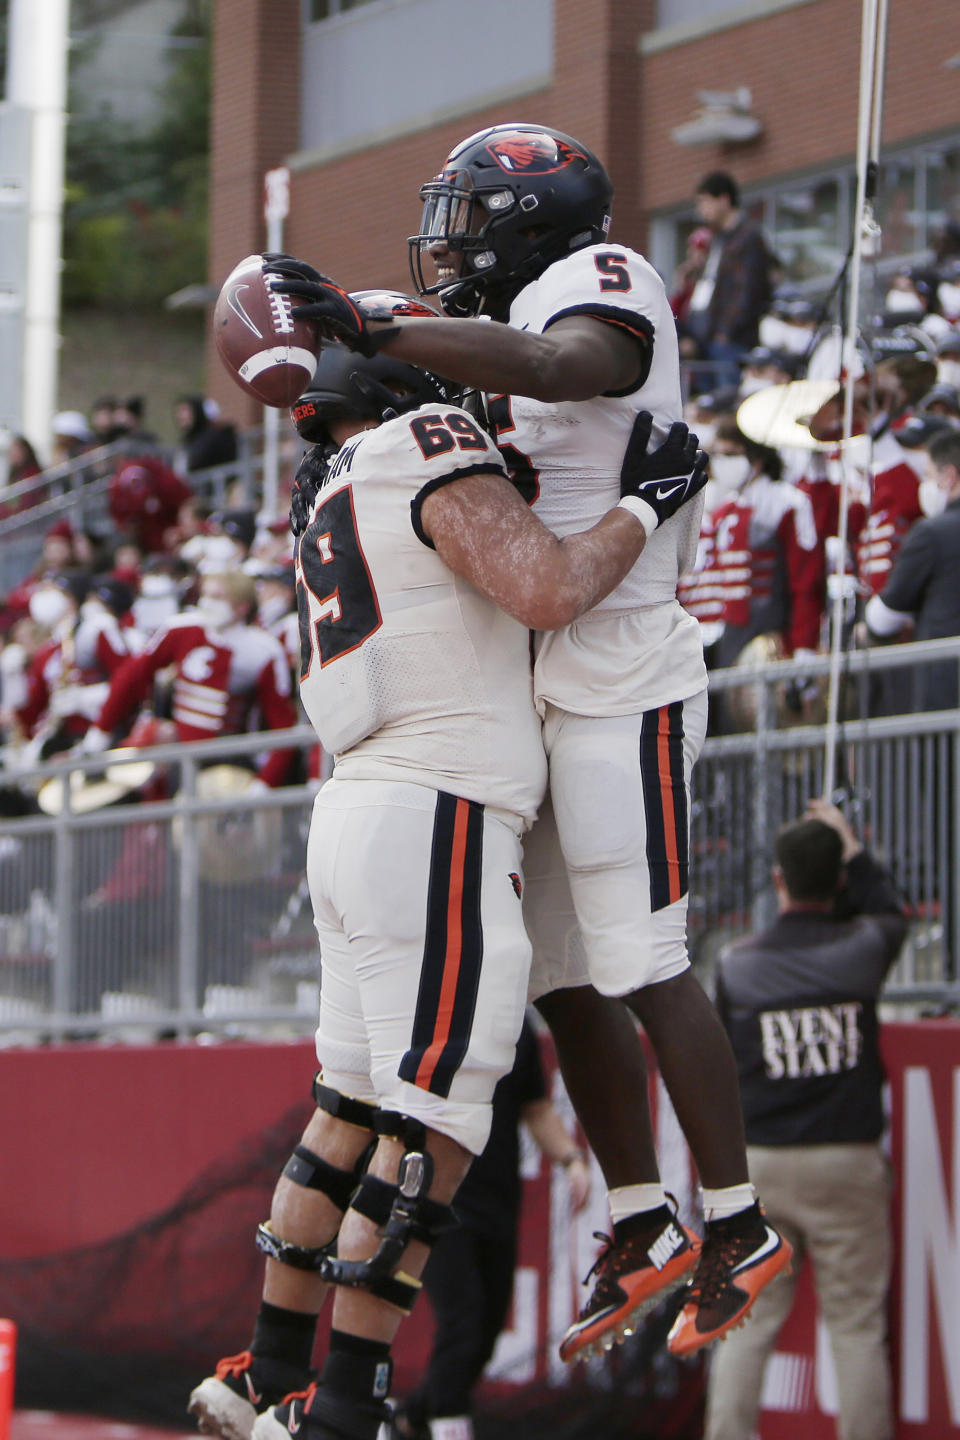 Oregon State running back Deshaun Fenwick (5) celebrates his touchdown with offensive lineman Nous Keobounnam (69) during the second half of an NCAA college football game against Washington State, Saturday, Oct. 9, 2021, in Pullman, Wash. Washington State won 31-24. (AP Photo/Young Kwak)